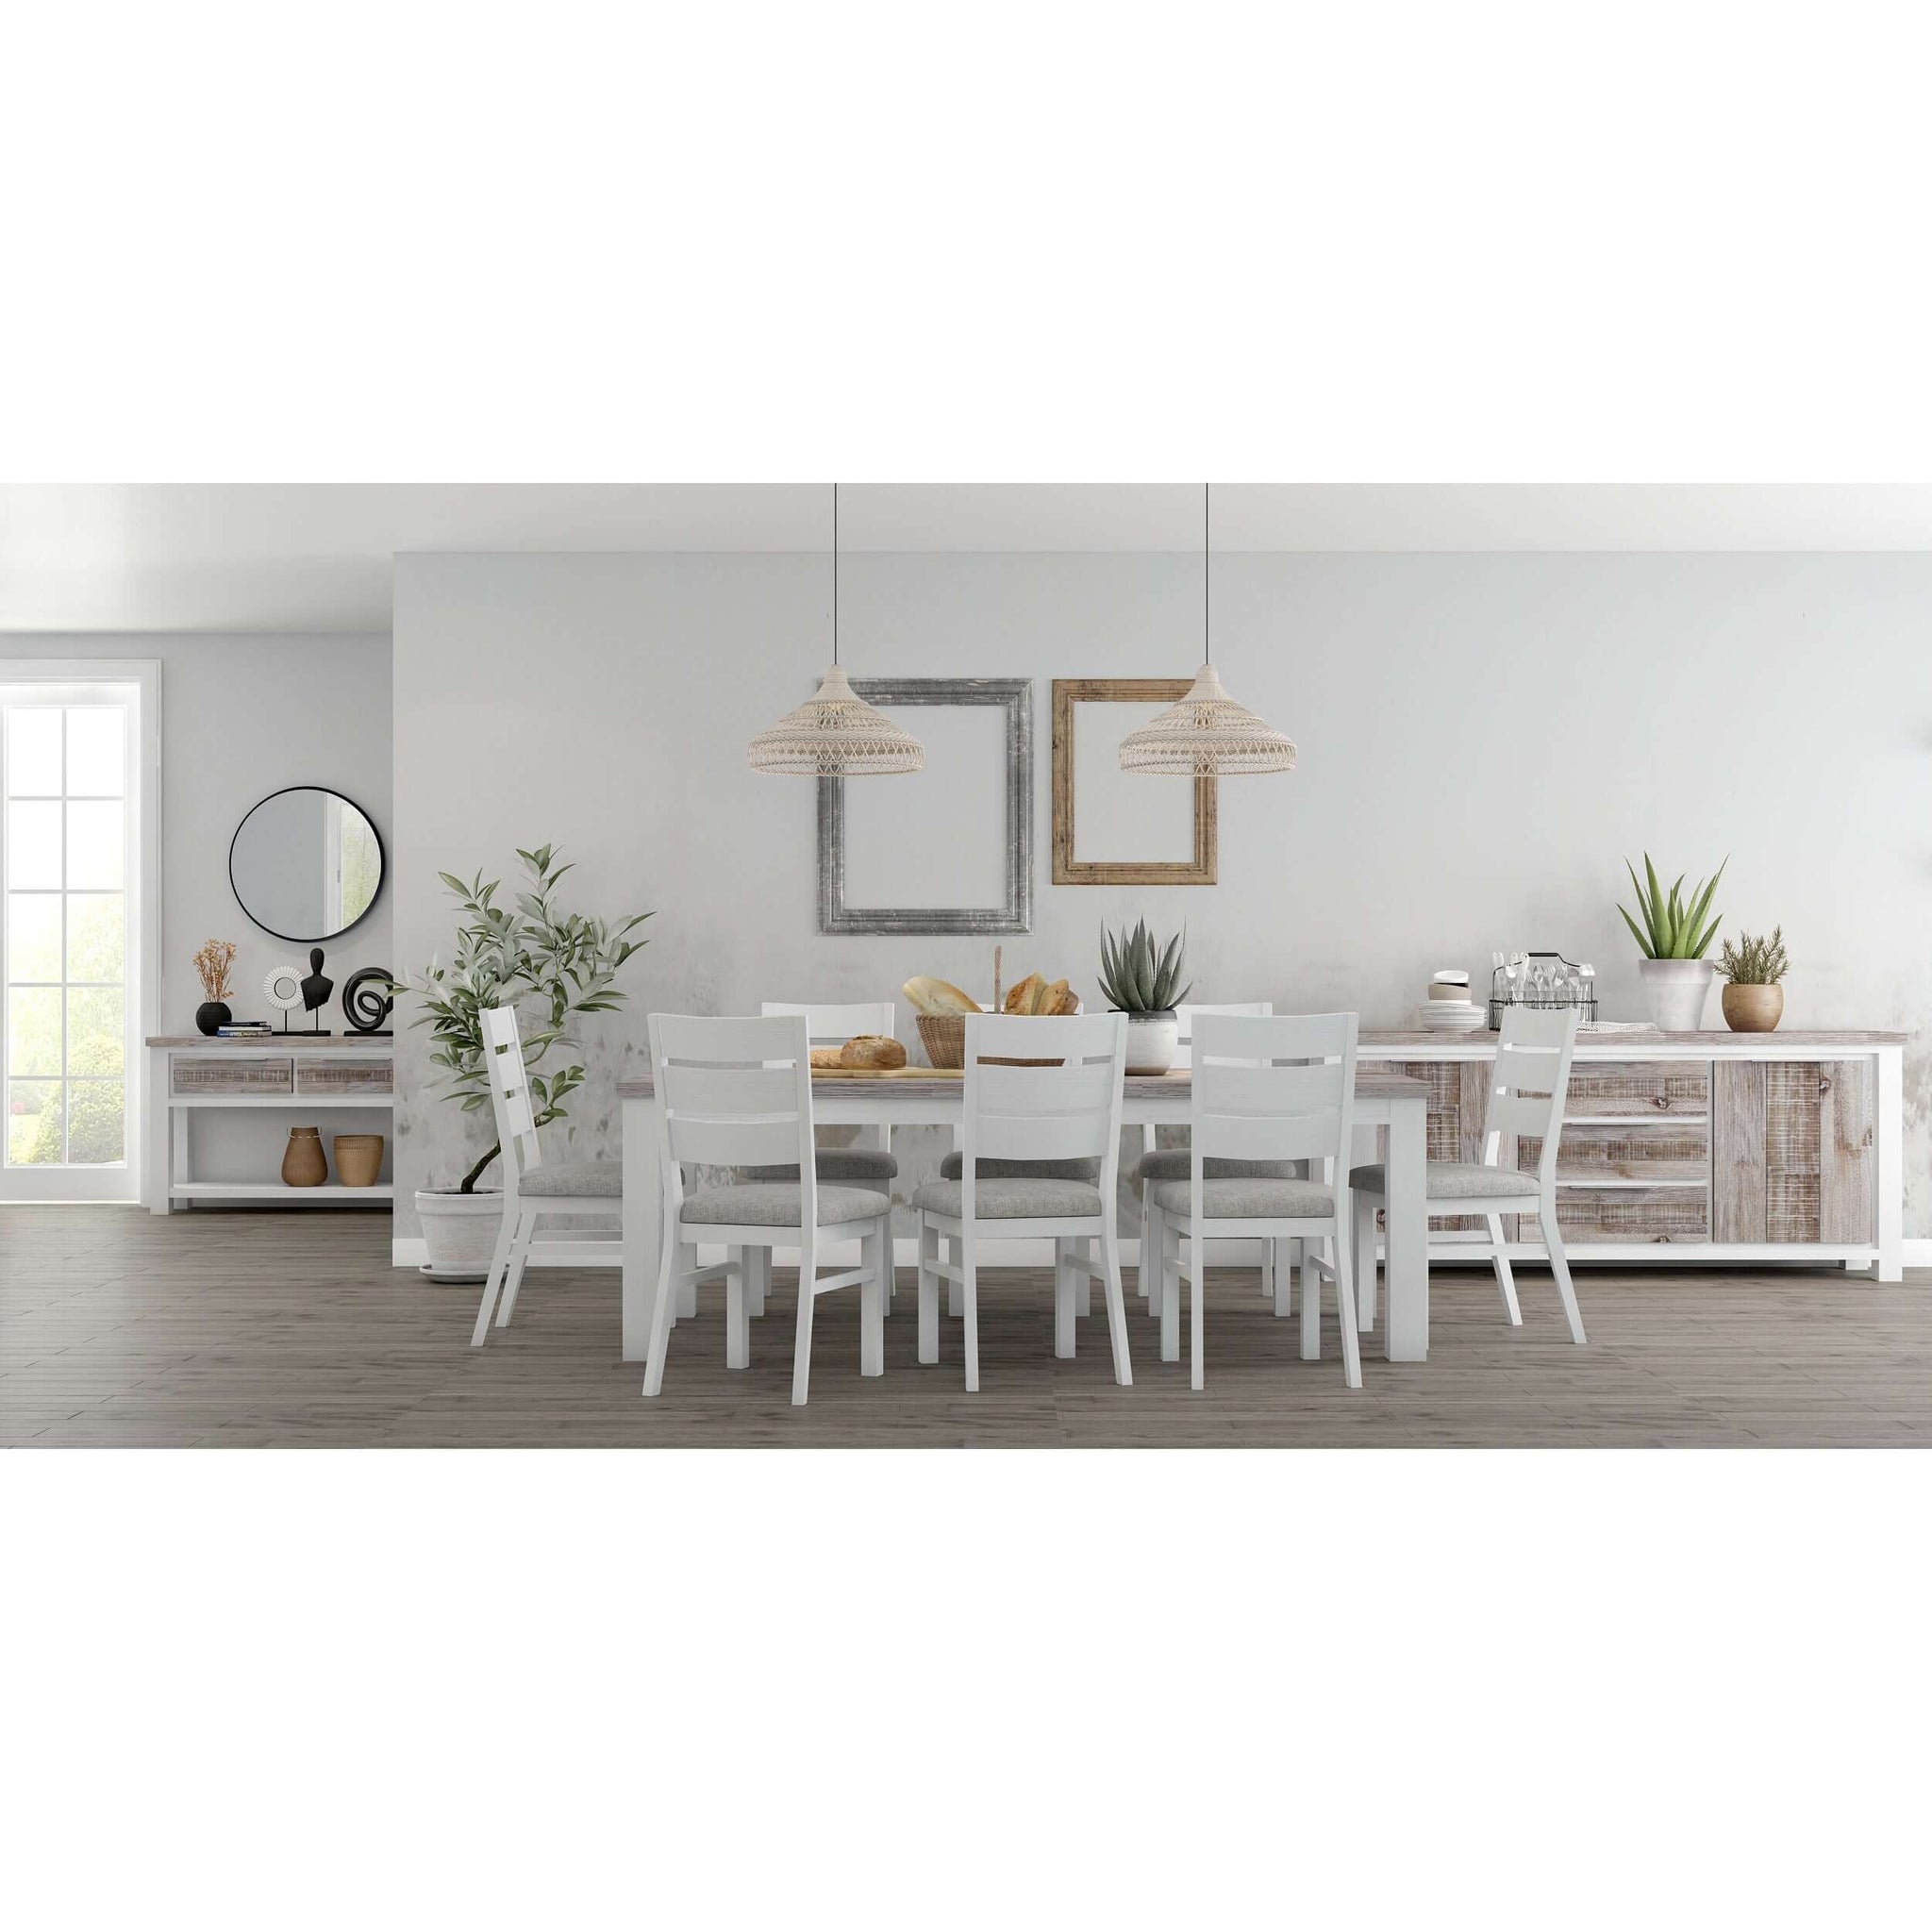 Plumeria Dining Chair Set of 8 Solid Acacia Wood Dining Furniture - White Brush-Upinteriors